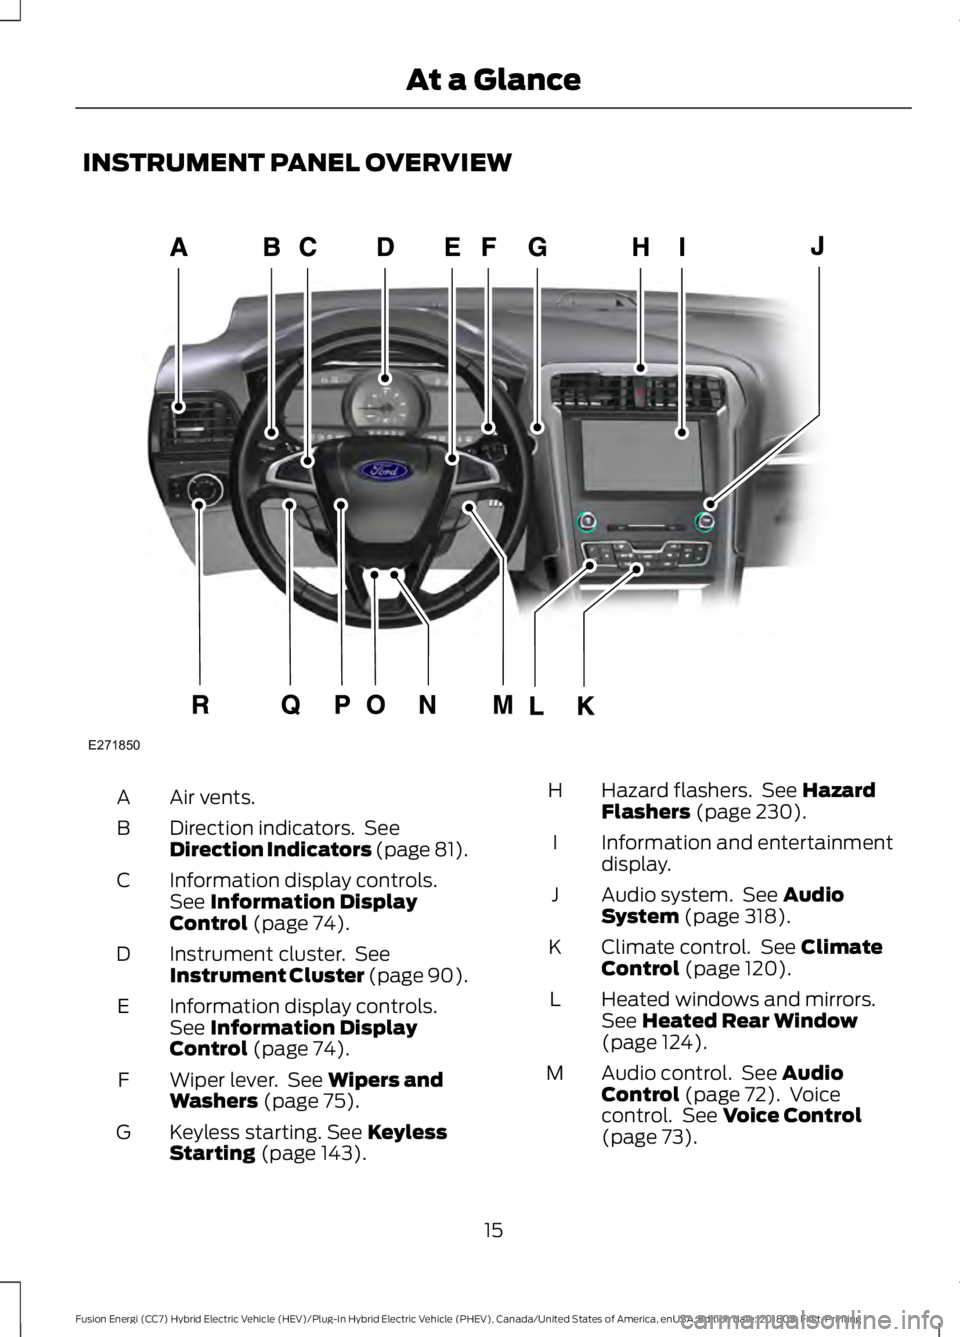 FORD FUSION HYBRID 2019  Owners Manual INSTRUMENT PANEL OVERVIEW
Air vents.
A
Direction indicators.  See
Direction Indicators (page 81).
B
Information display controls.
See Information Display
Control (page 74).
C
Instrument cluster.  See
